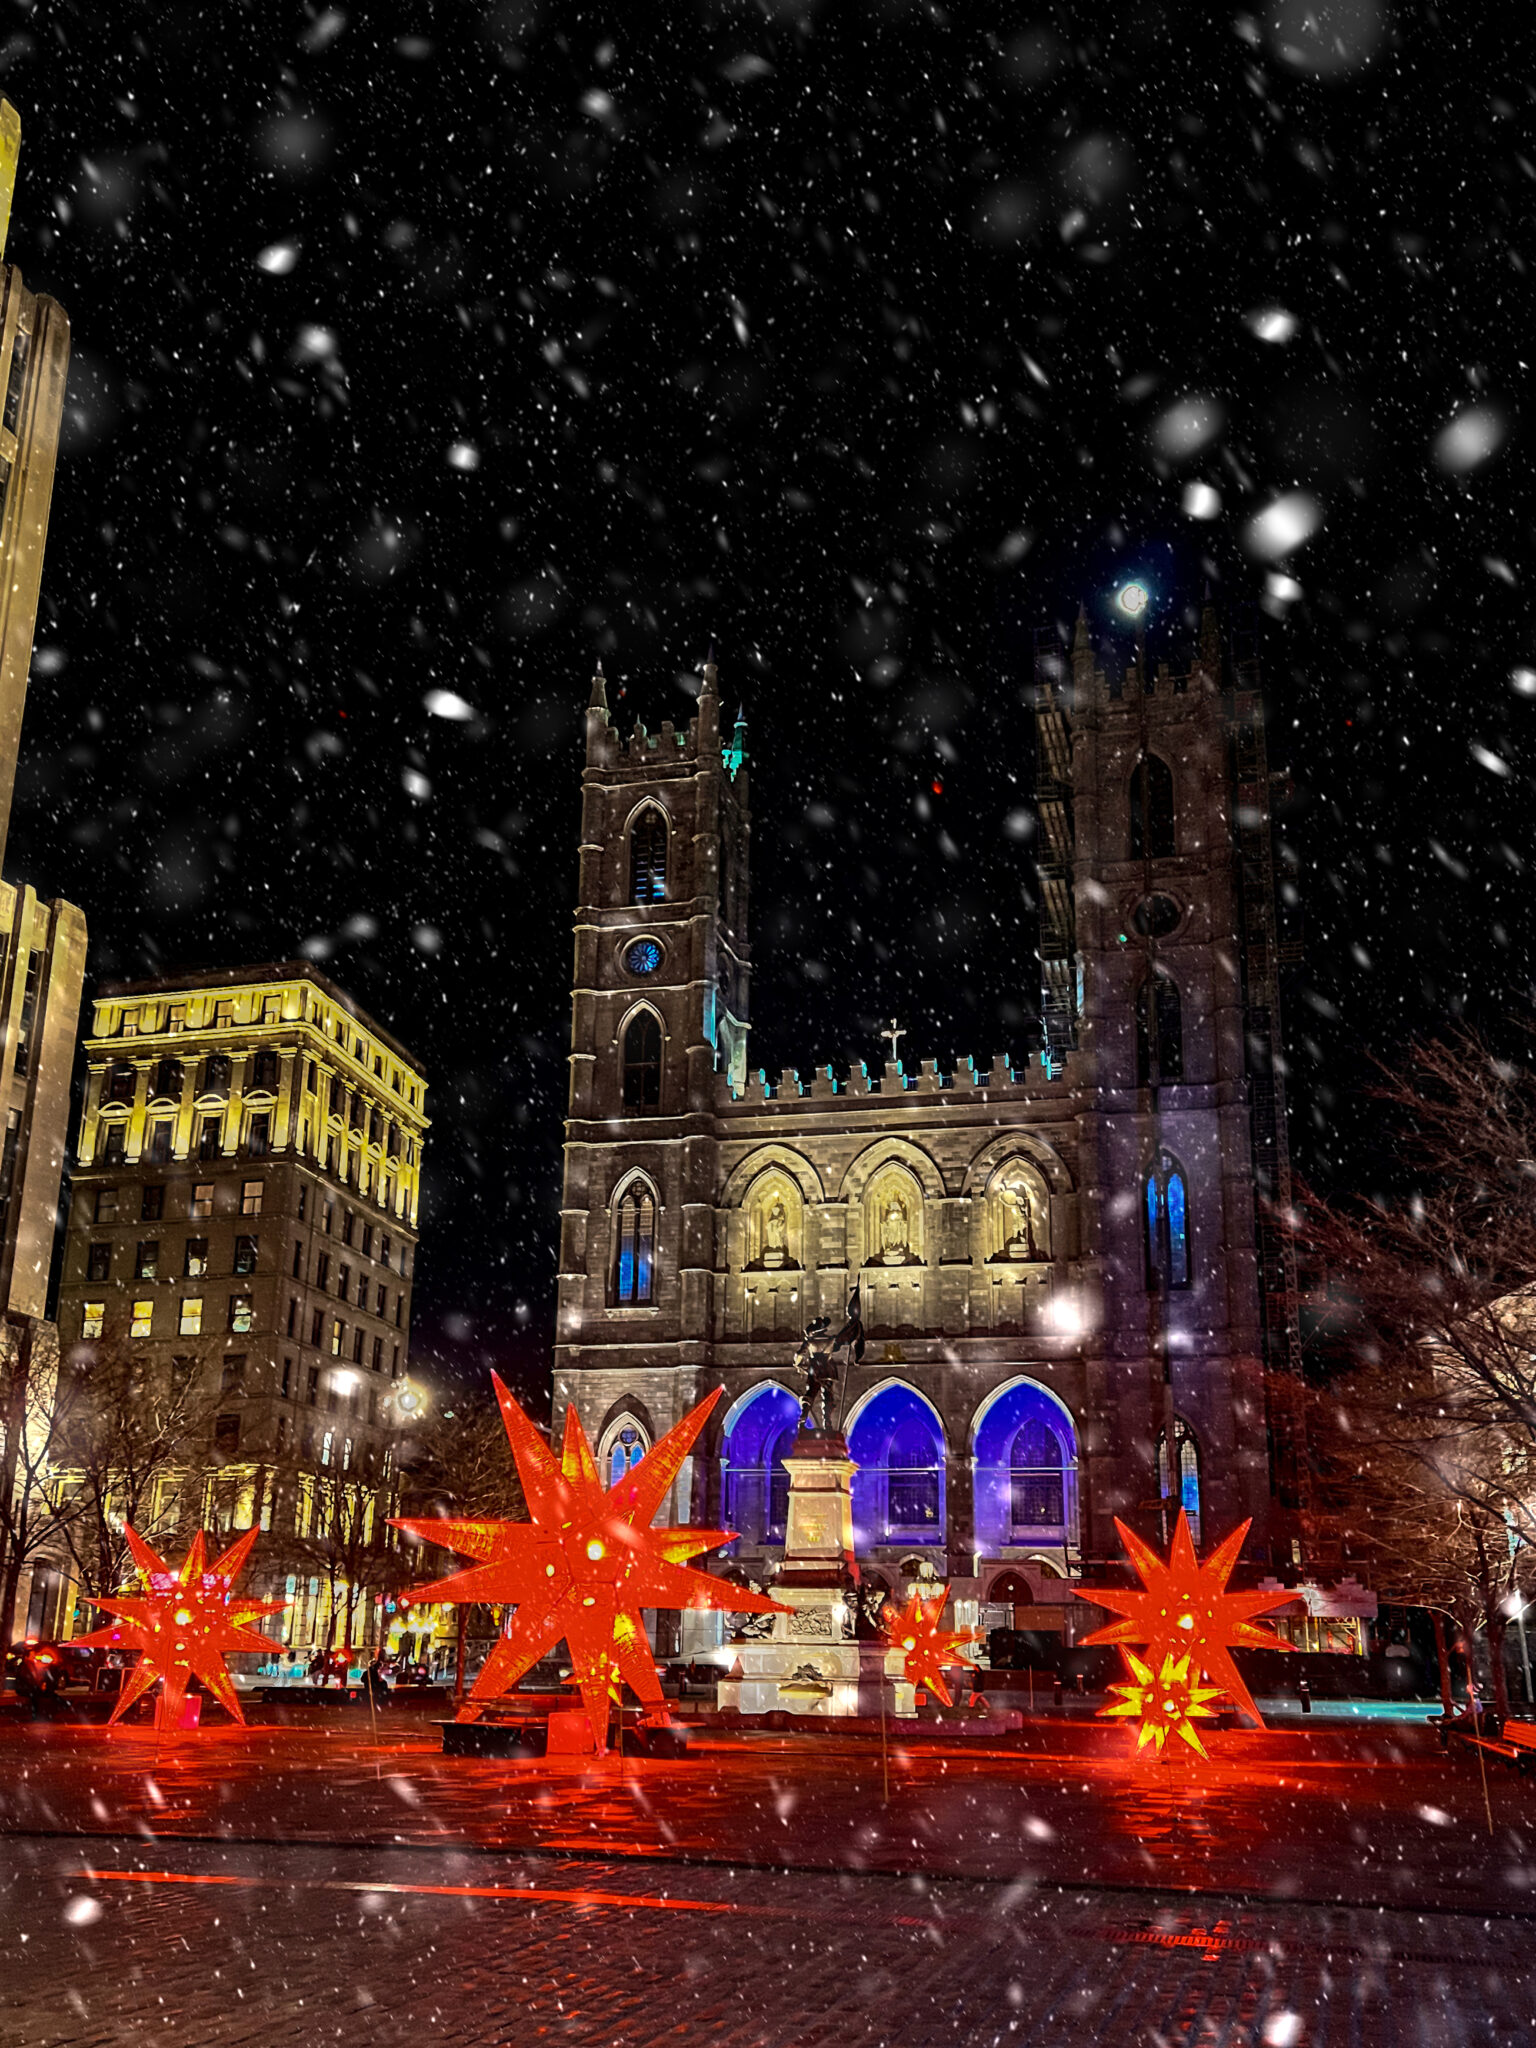 The Ultimate Self Guided Tour of Old Montreal’s Best Christmas Lights